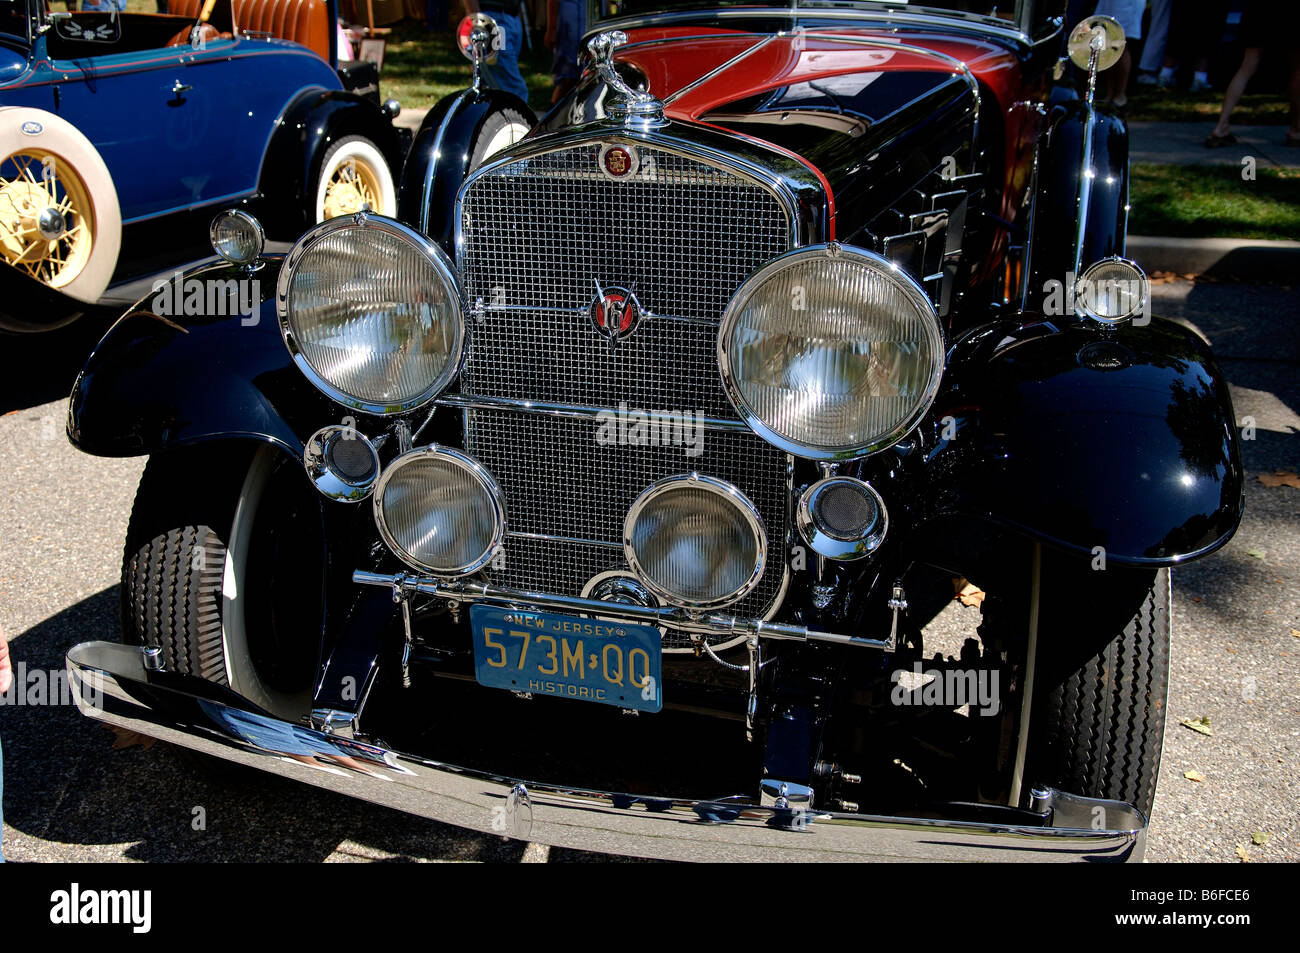 1930 Cadillac, front detail, at a Classic Car Show in Belvidere, New Jersey, USA Stock Photo